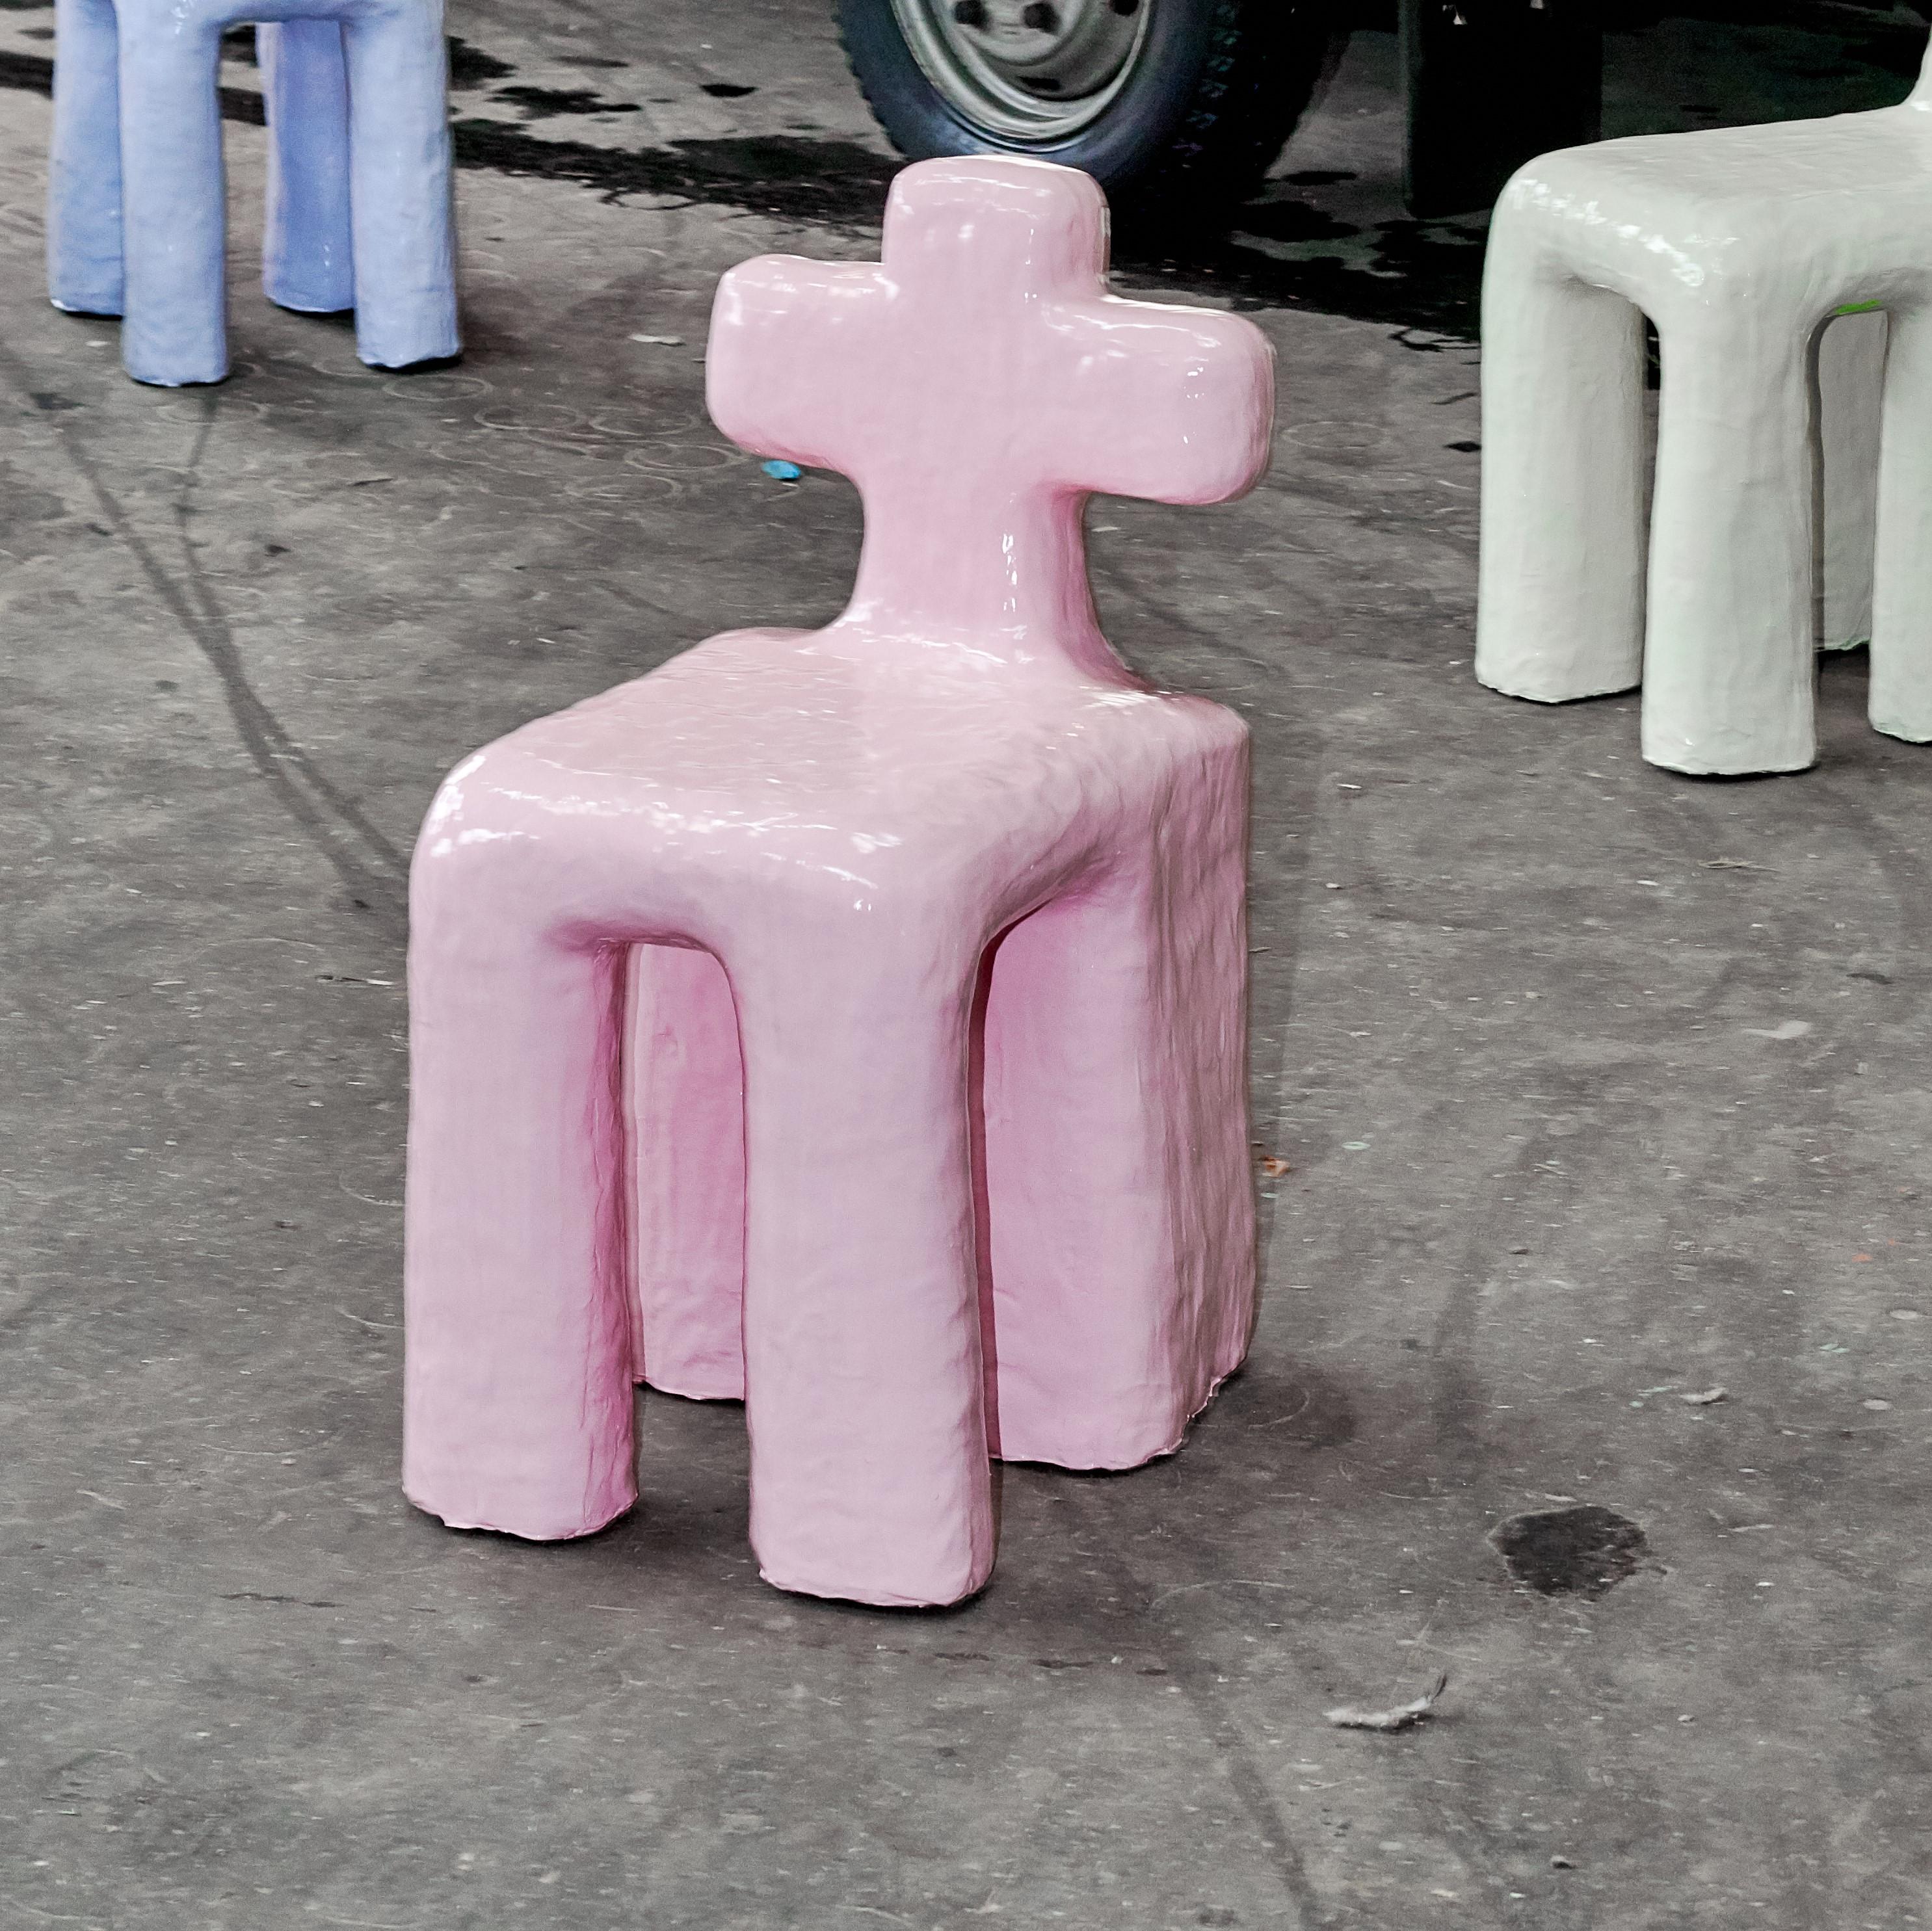 Funky stool made in 467 Minutes by Minute Manufacturing
Dimensions: 42 x 42 x 56 cm
Materials: Waste materials
Such as cardboard tubes, plastic boxes, leather, clay

Minute Manufacturing is a production system that makes objects by the minute.